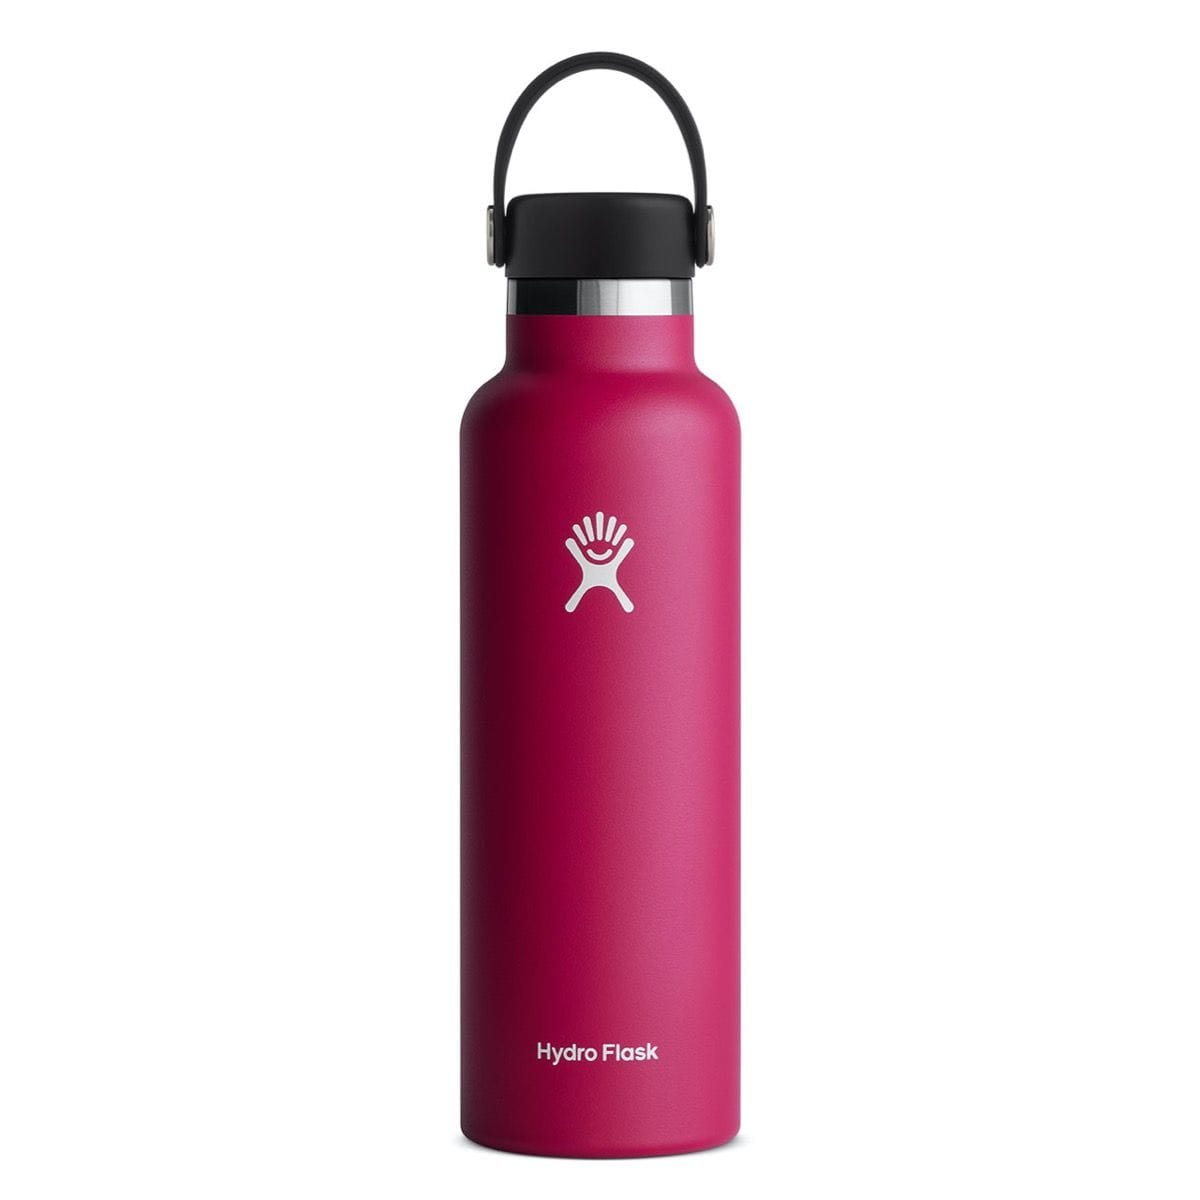 Hydro Flask Insulated Drinkware Hydro Flask 21 oz Standard Mouth Bottle - Snapper